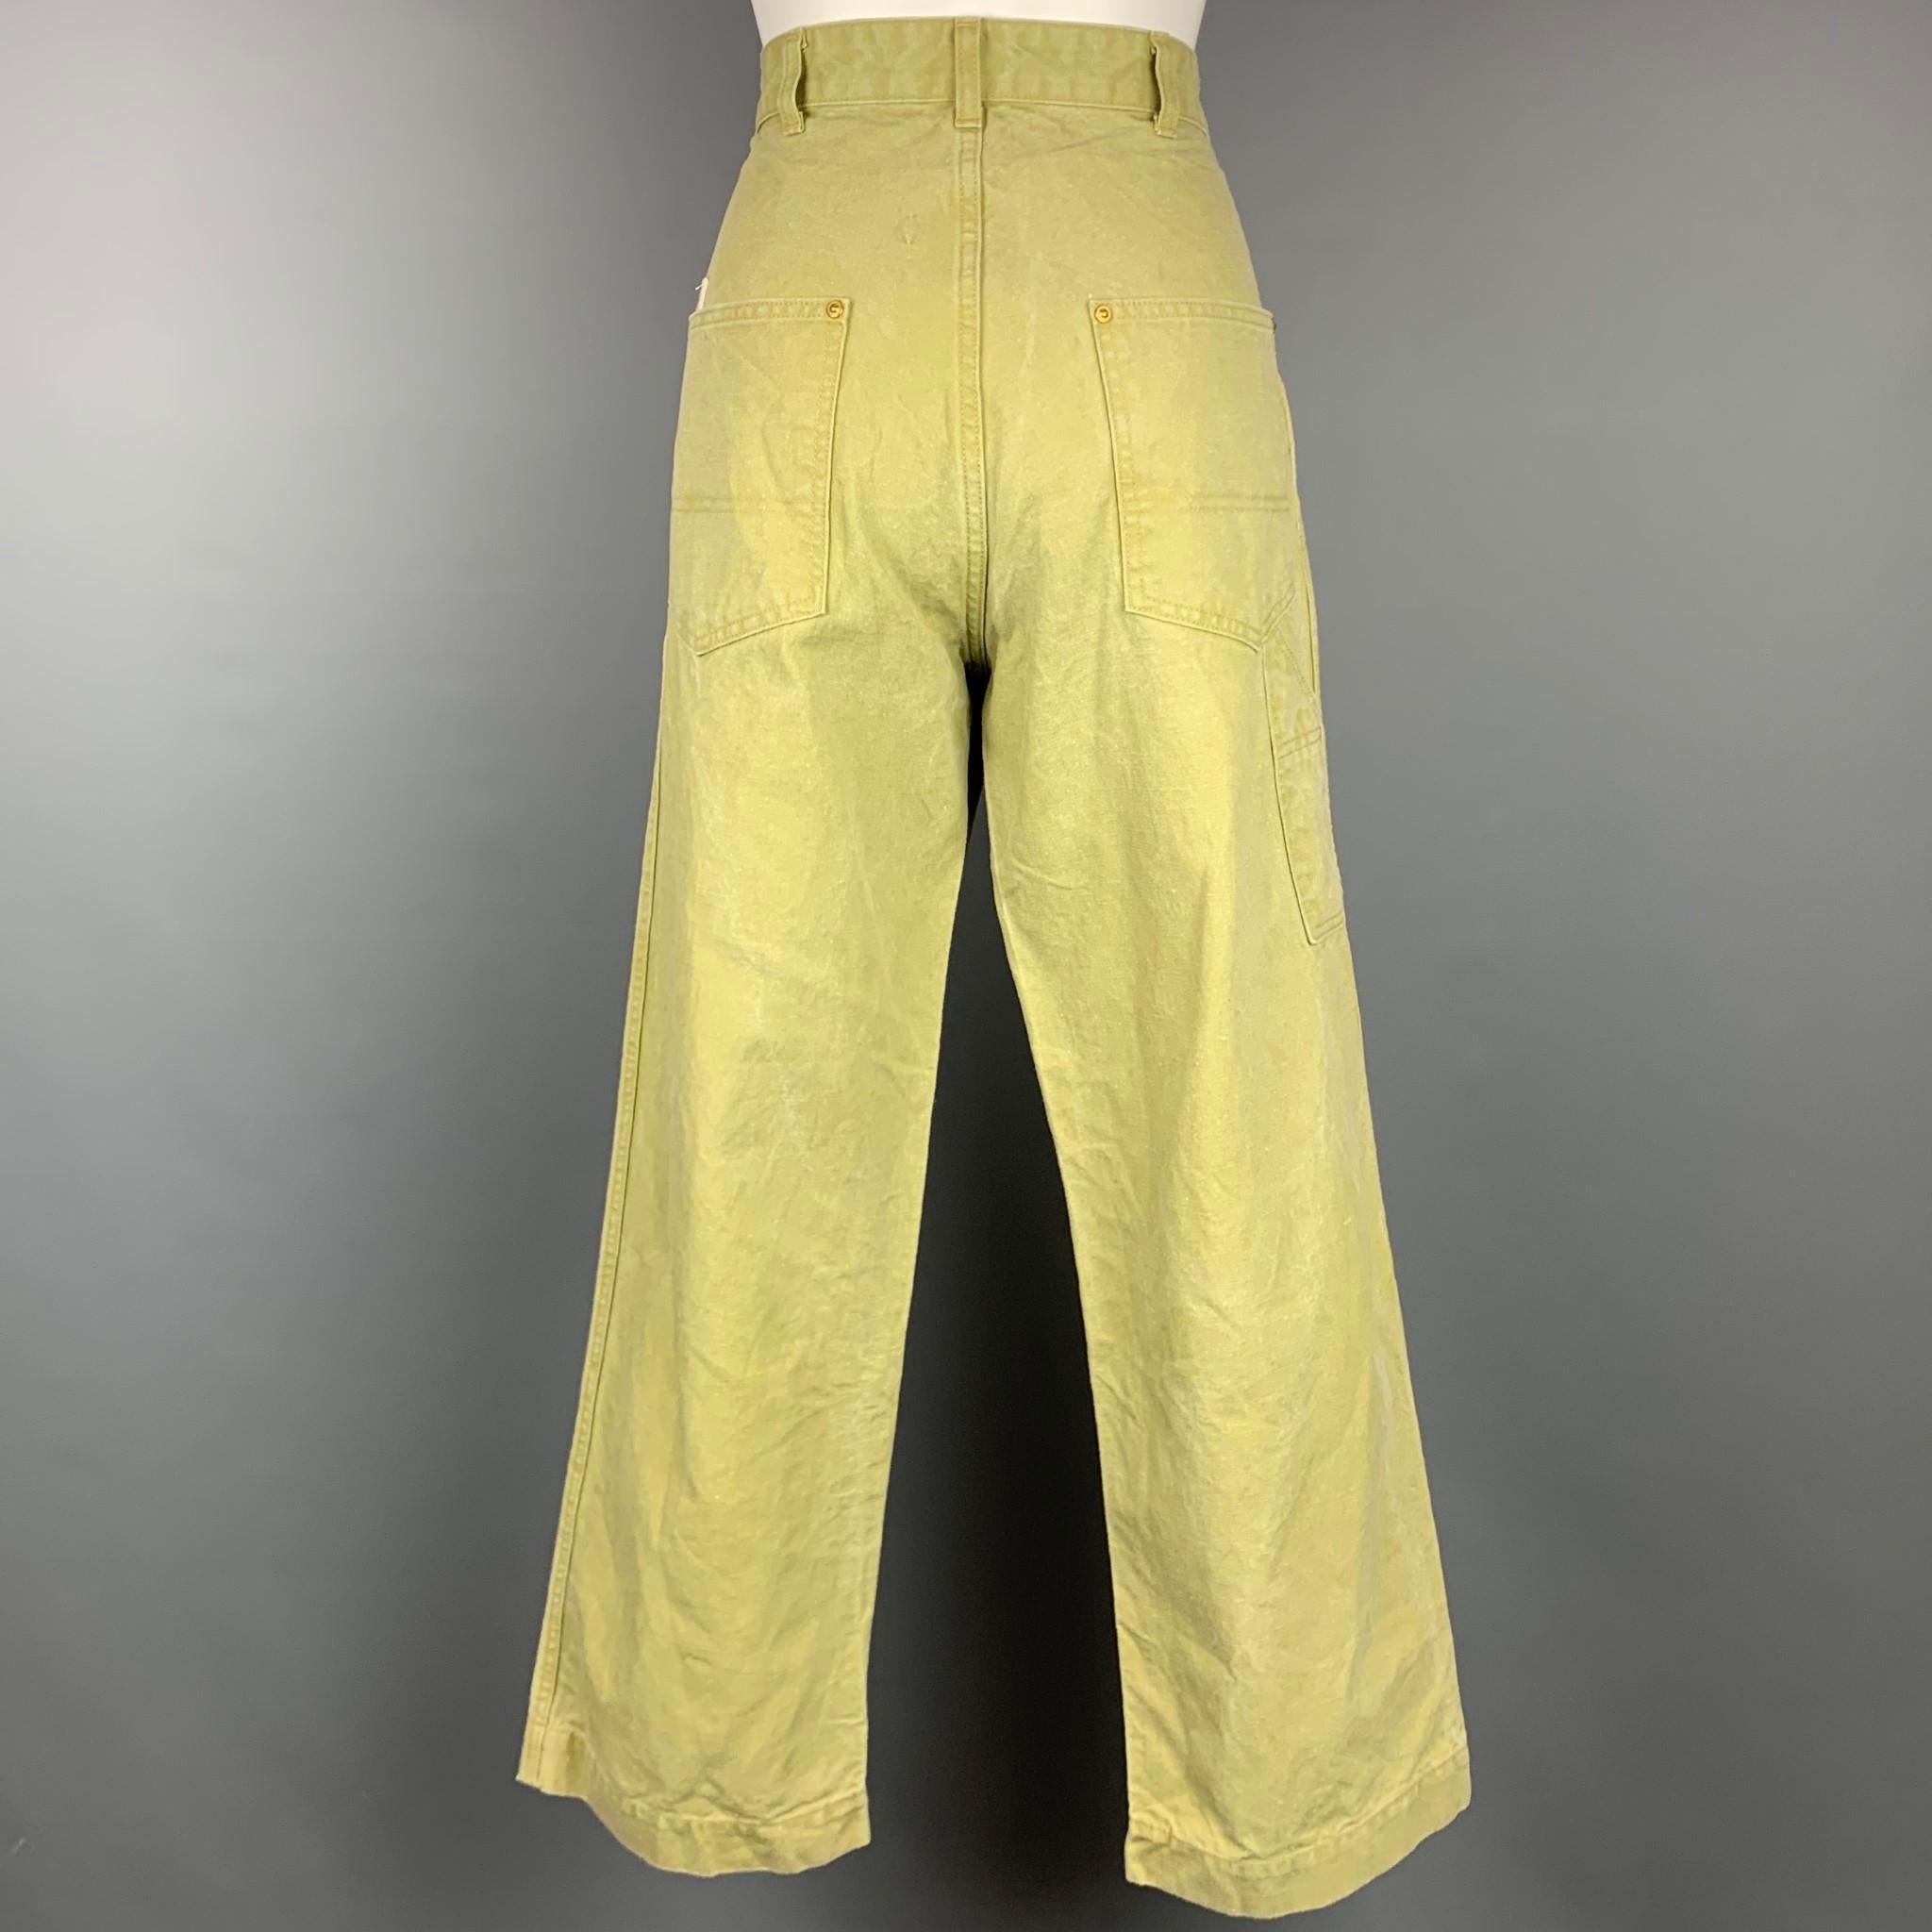 CHIMALA jeans comes in a lime green cotton / linen denim featuring a high waisted style, contrast stitching, and a button fly closure. Made in Japan.

Very Good Pre-Owned Condition.
Marked: 26
Original Retail Price: $565.00

Measurements:

Waist: 28